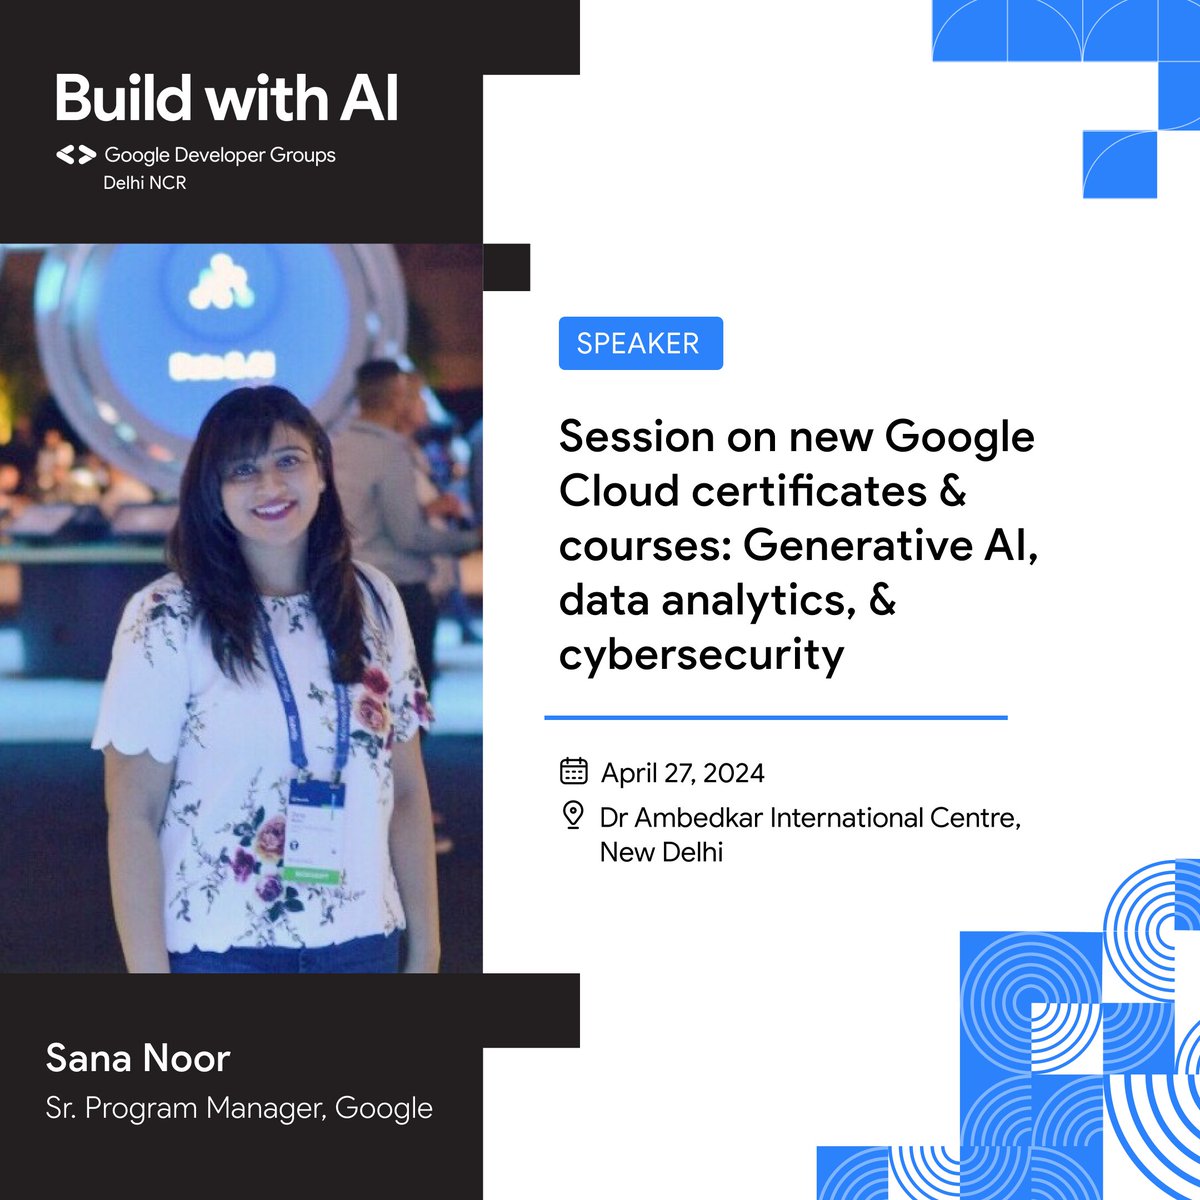 Sana Noor - Google Cloud Certs: Yo, cloud gurus! 🌩️ Don't miss your shot to get the 411 on Google Cloud's latest certifications and training programs from the one and only Sana Noor. Whether you're trying to future-proof that career or just stay ahead of the game in AI